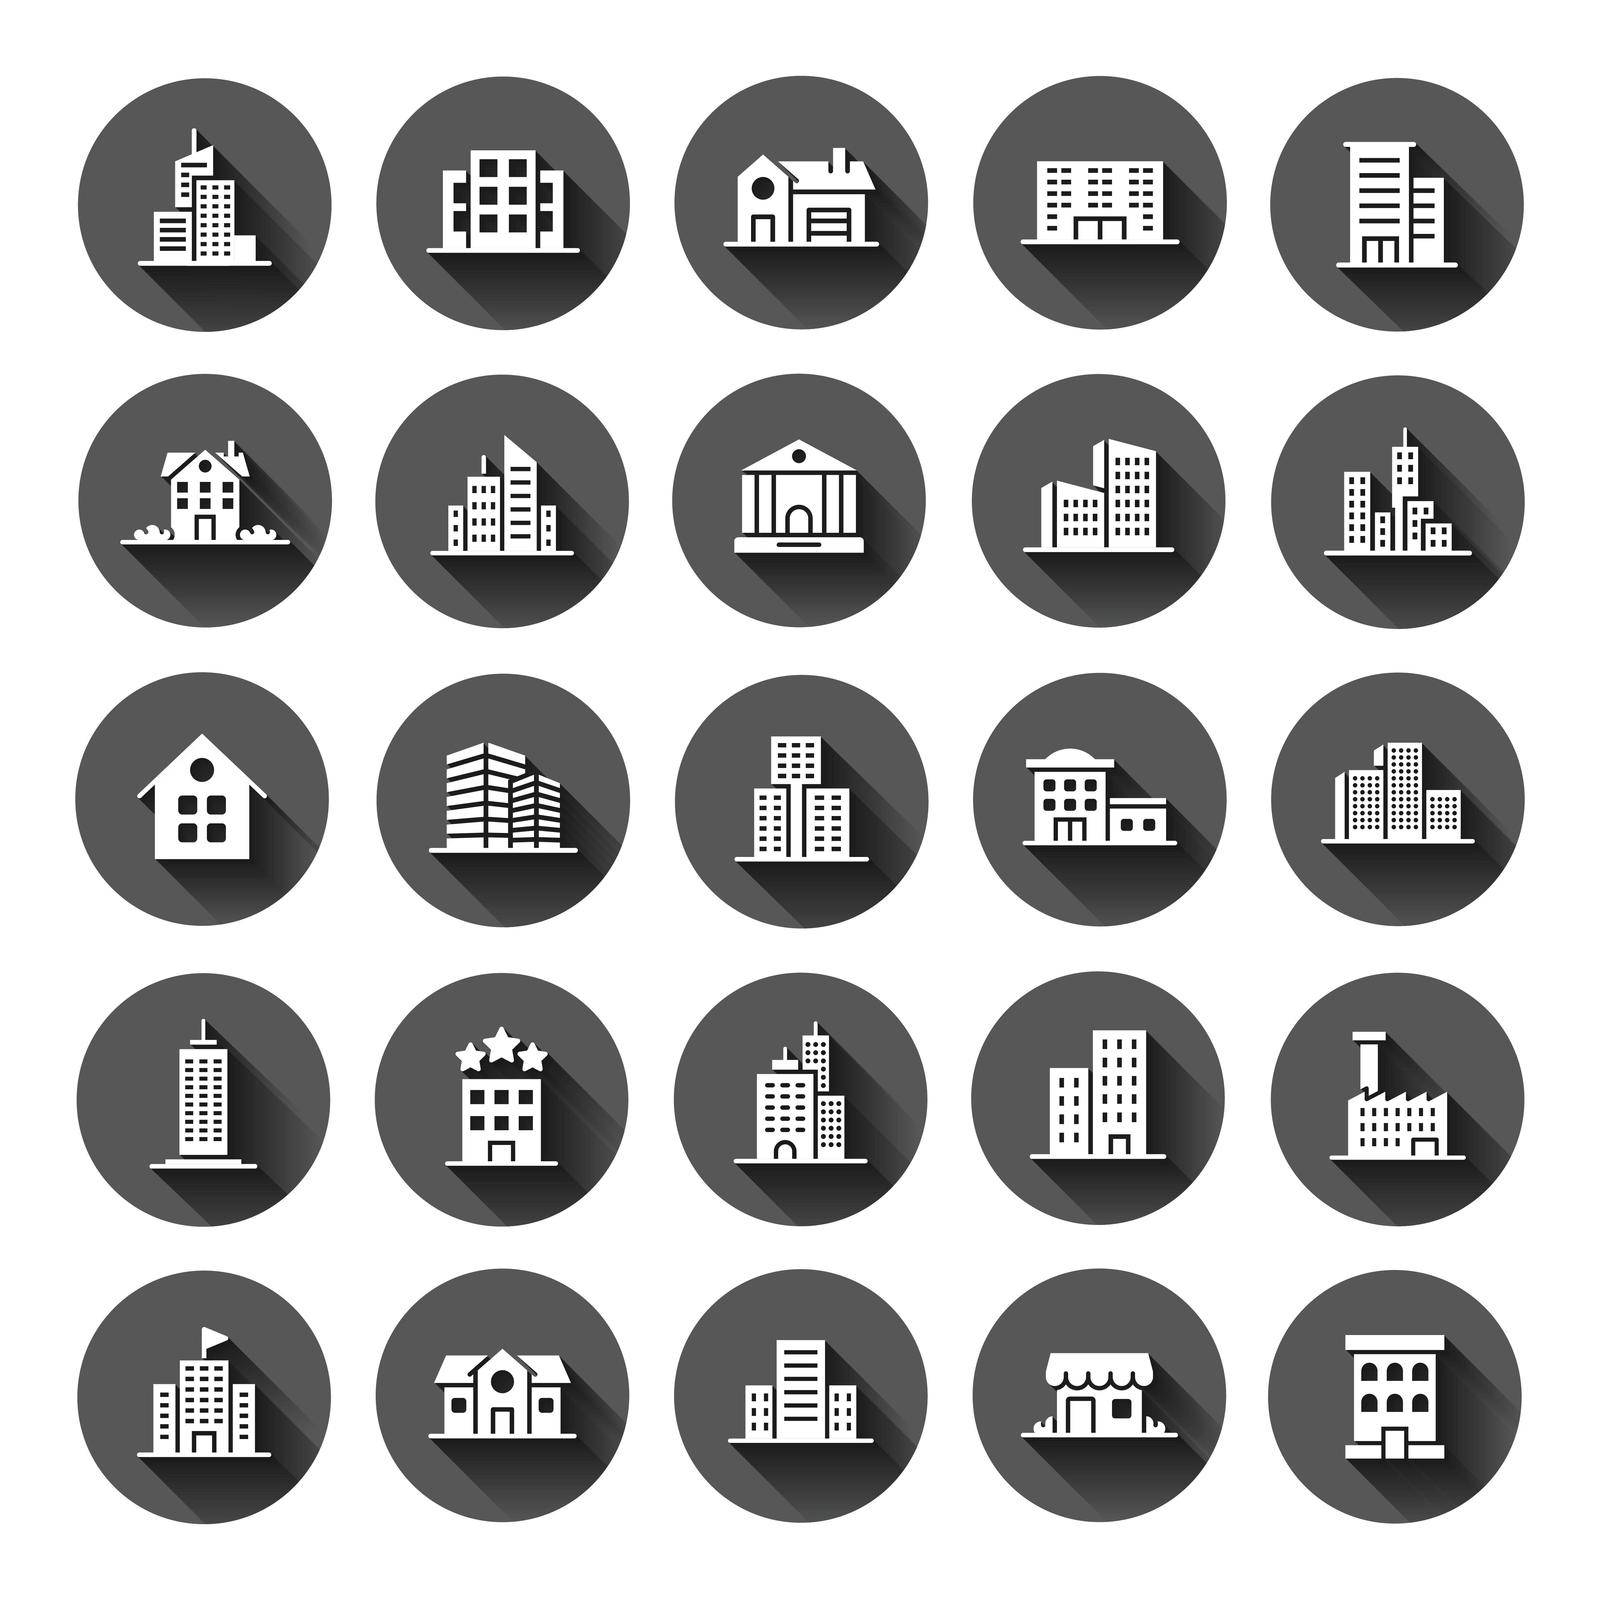 Building icon set in flat style. Town skyscraper apartment vector illustration on black round background with long shadow effect. City tower circle button business concept.